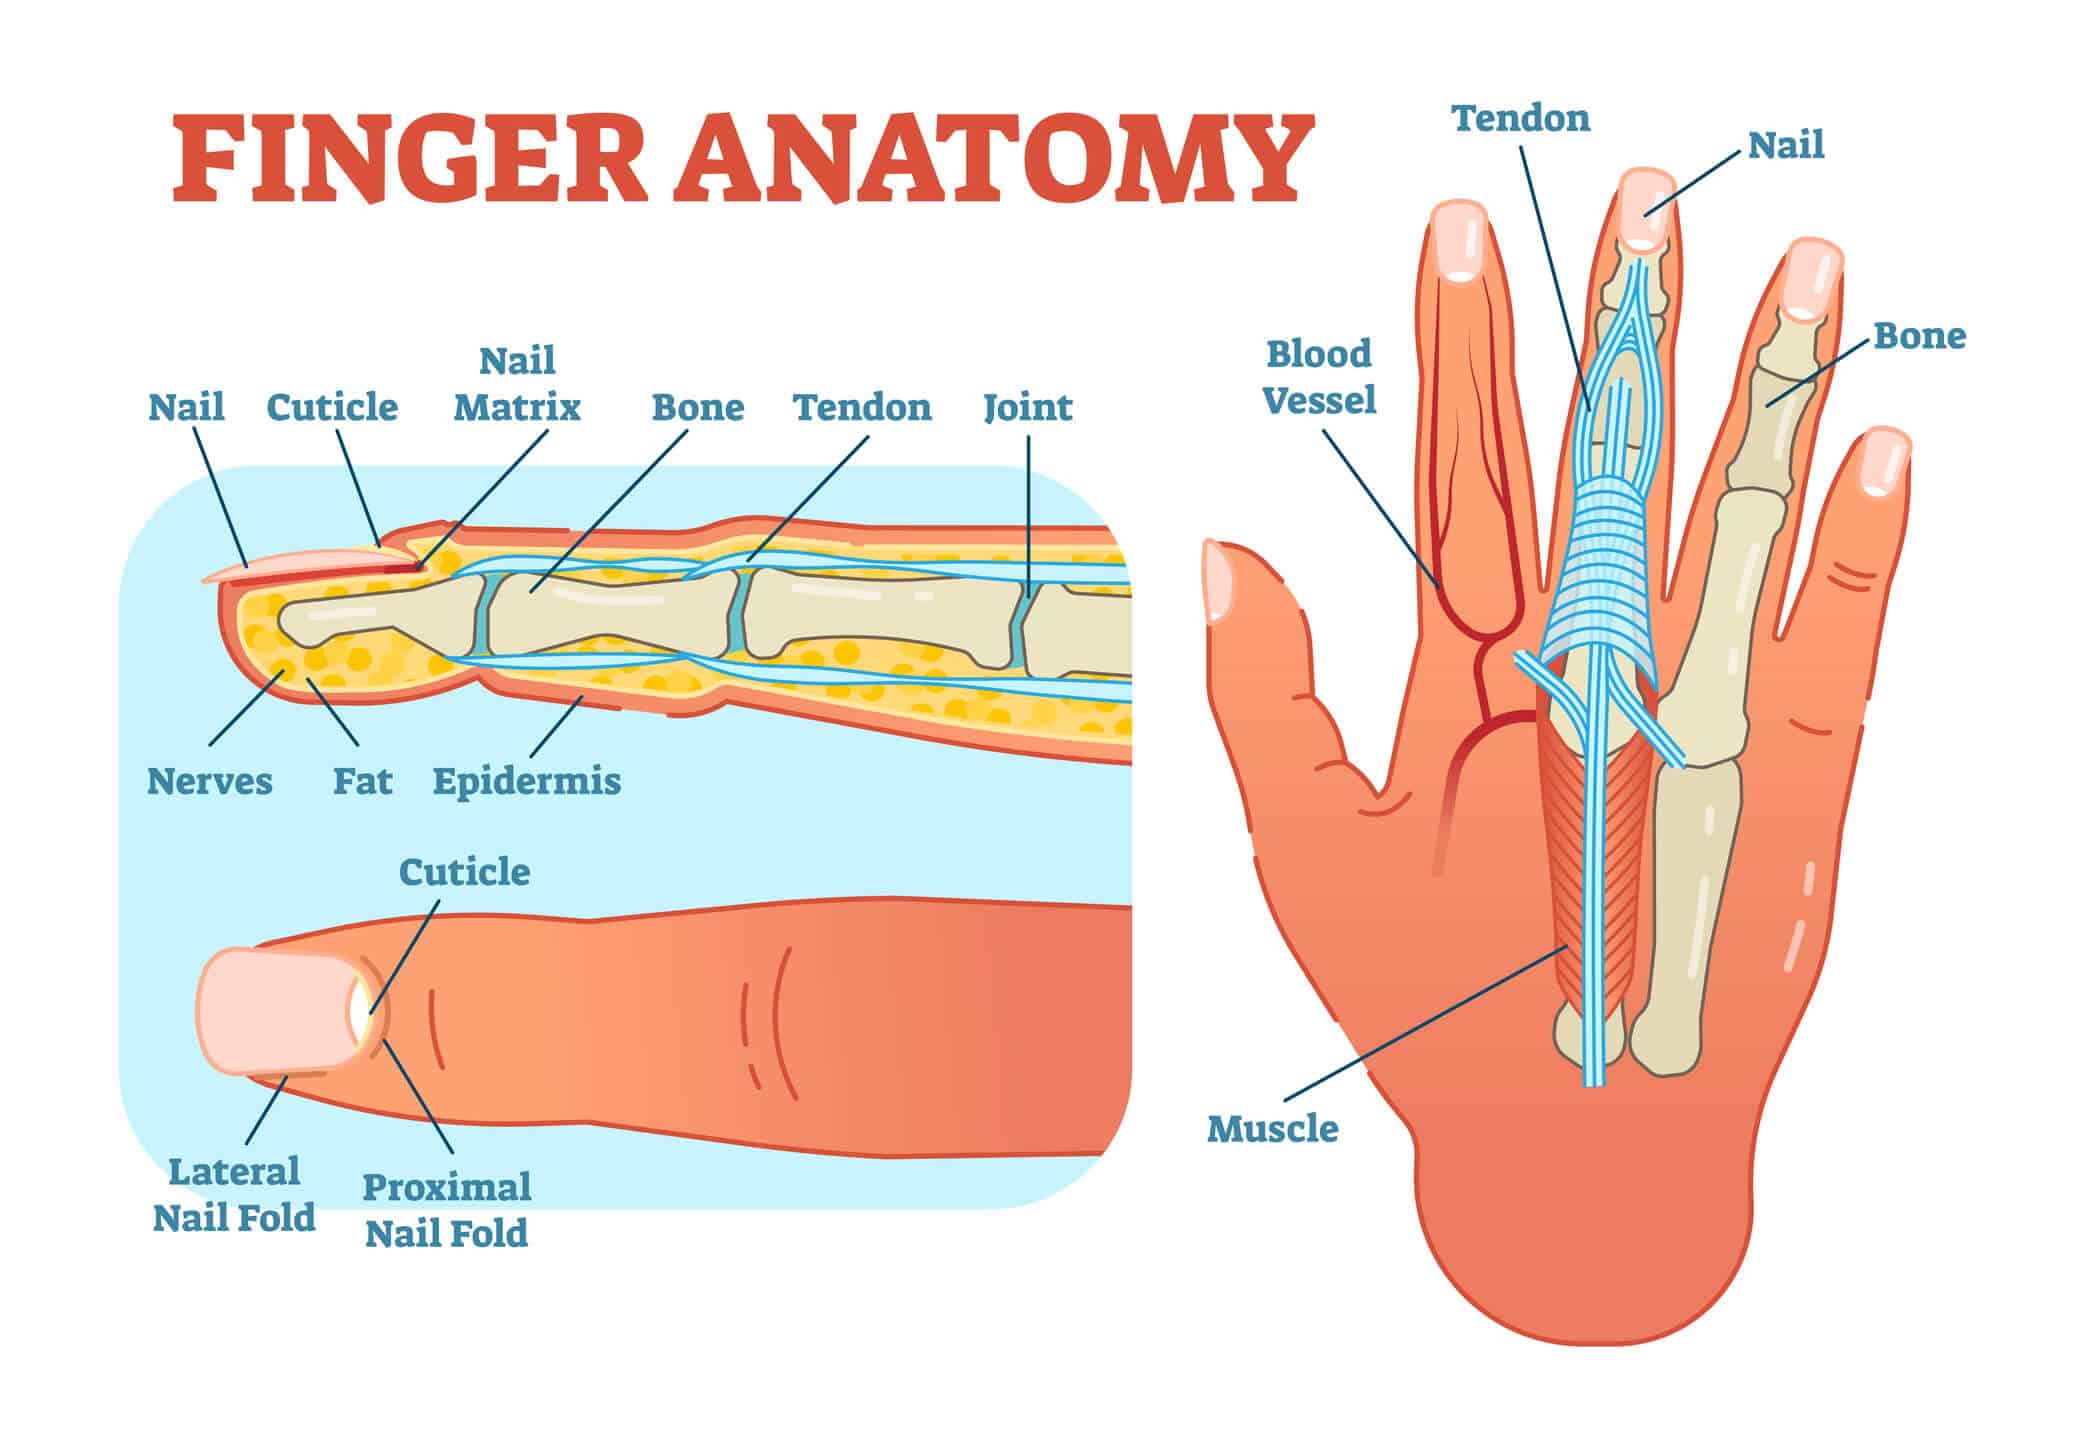 Image of the anatomy of the finger